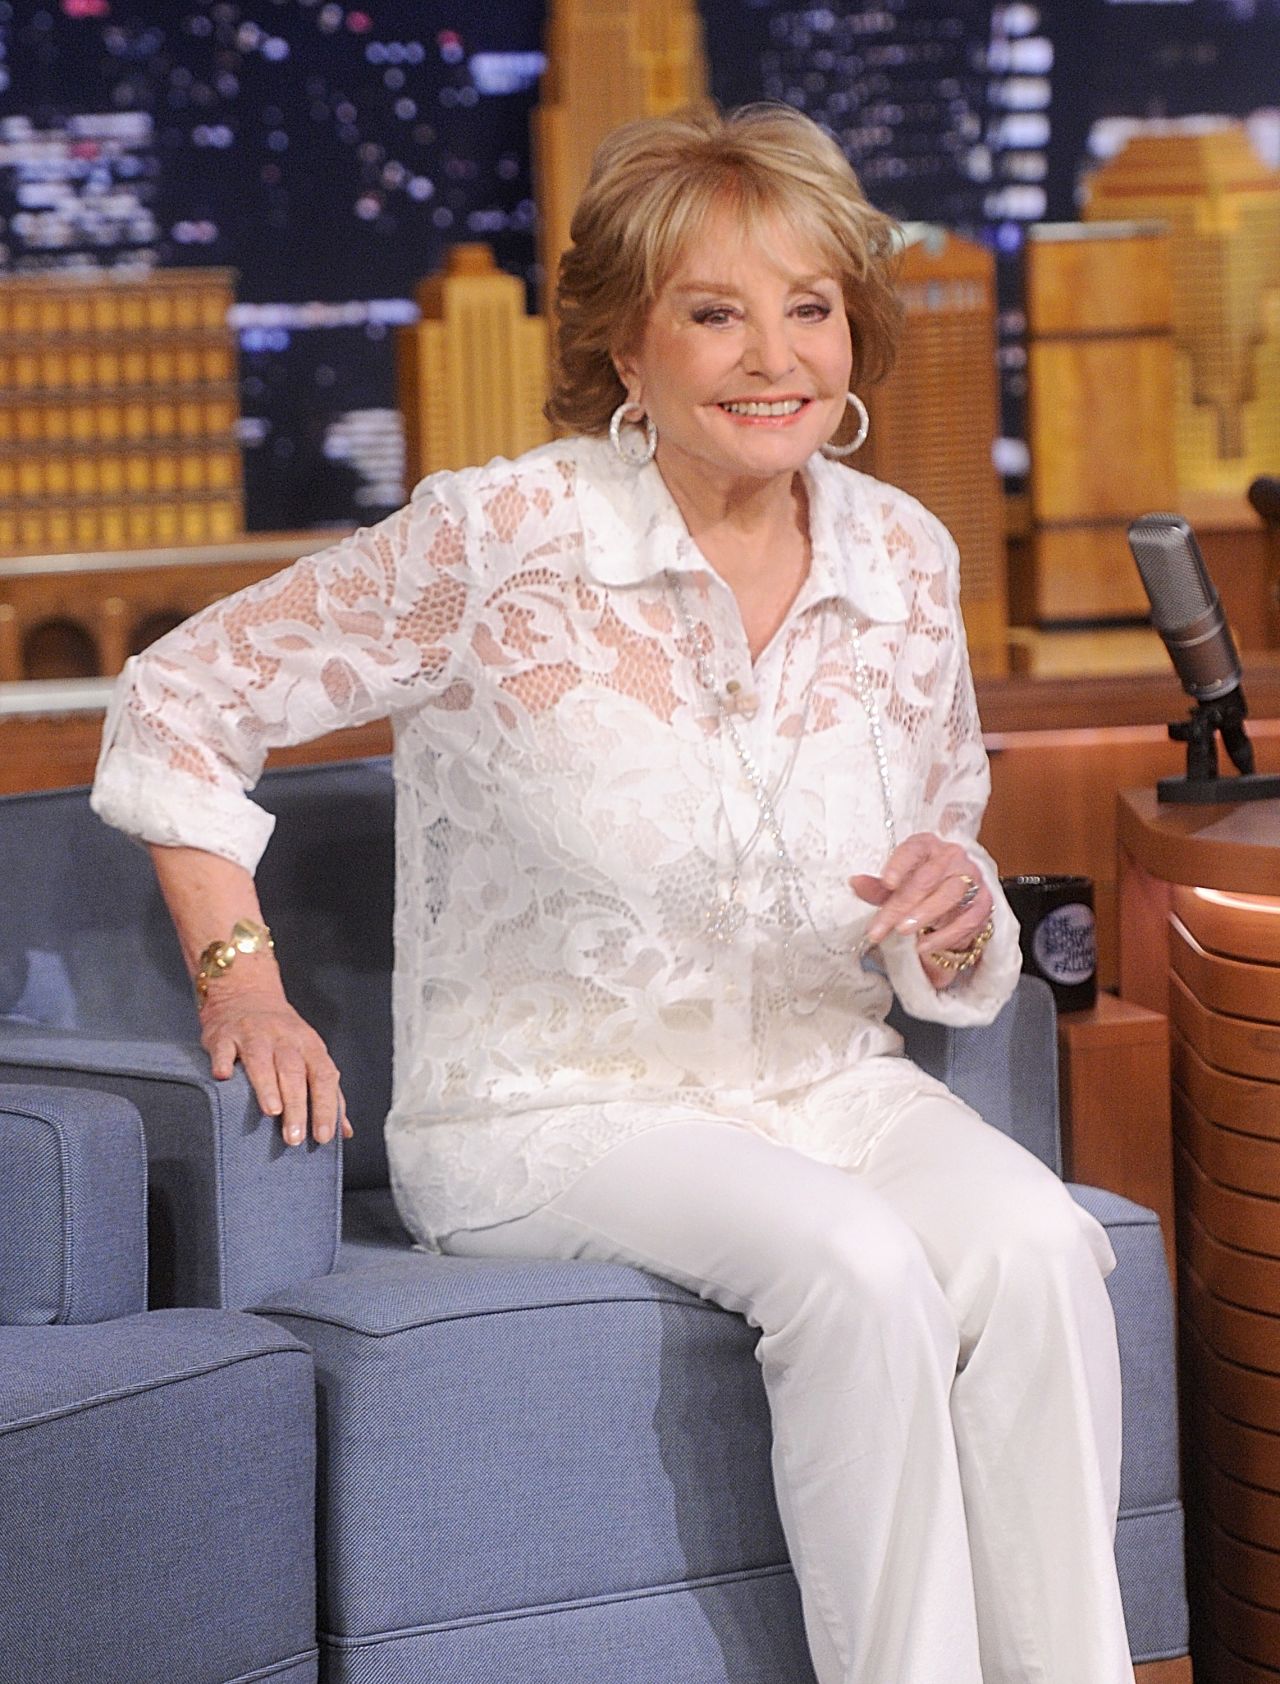 Barbara Walters was the doyenne of the show, having started in 1997 and often serving as a leader of the passionate panel discussions. <a href="http://www.cnn.com/2014/05/16/showbiz/tv/barbara-walters-the-view/index.html" target="_blank">She retired in May 2014. </a>